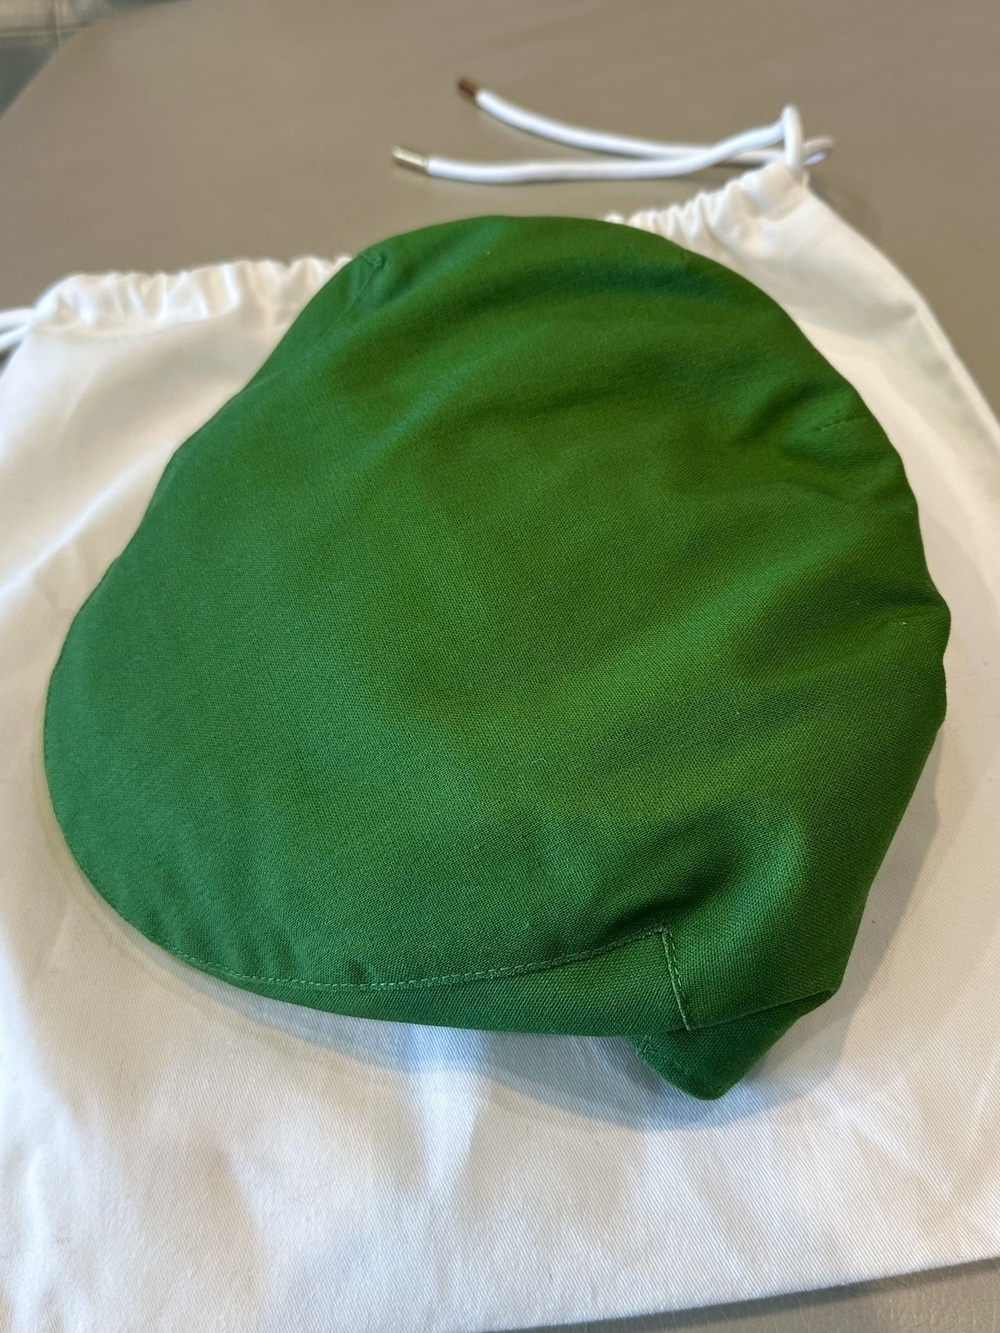 A green flat cap laying on the white cotton bag it came in.